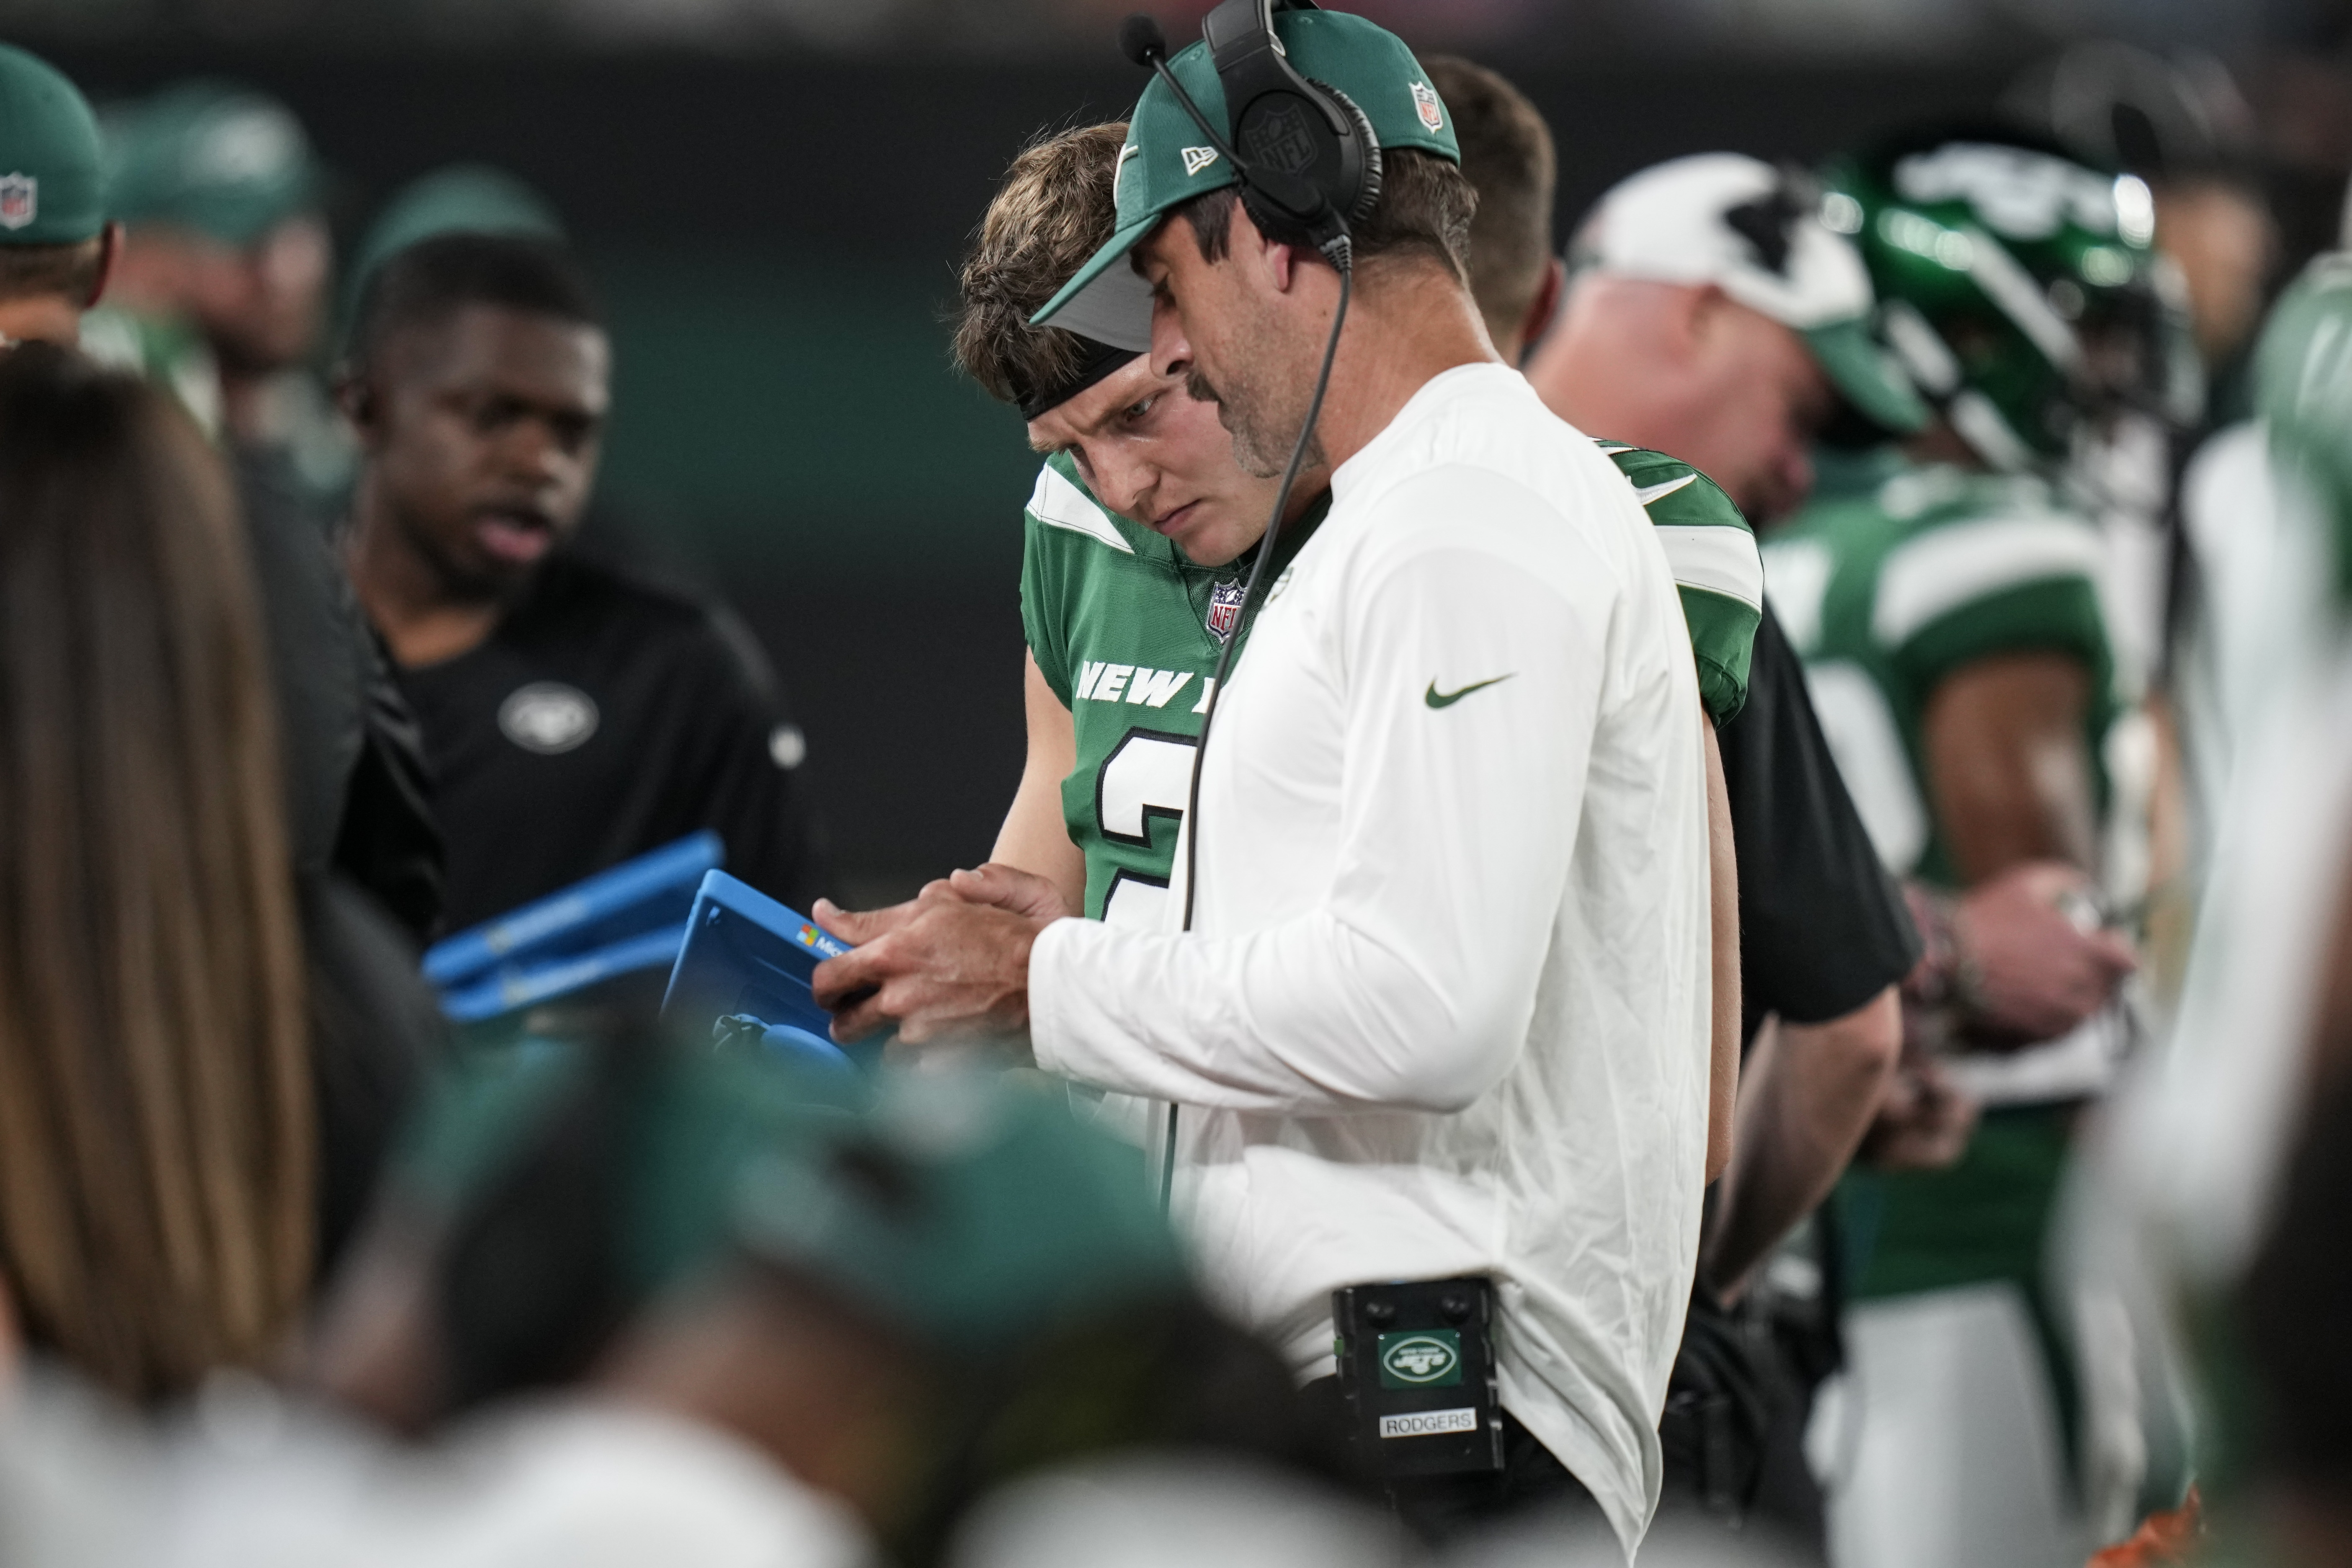 Mayfield sits while Trask plays in Bucs' 13-6 preseason win over Jets